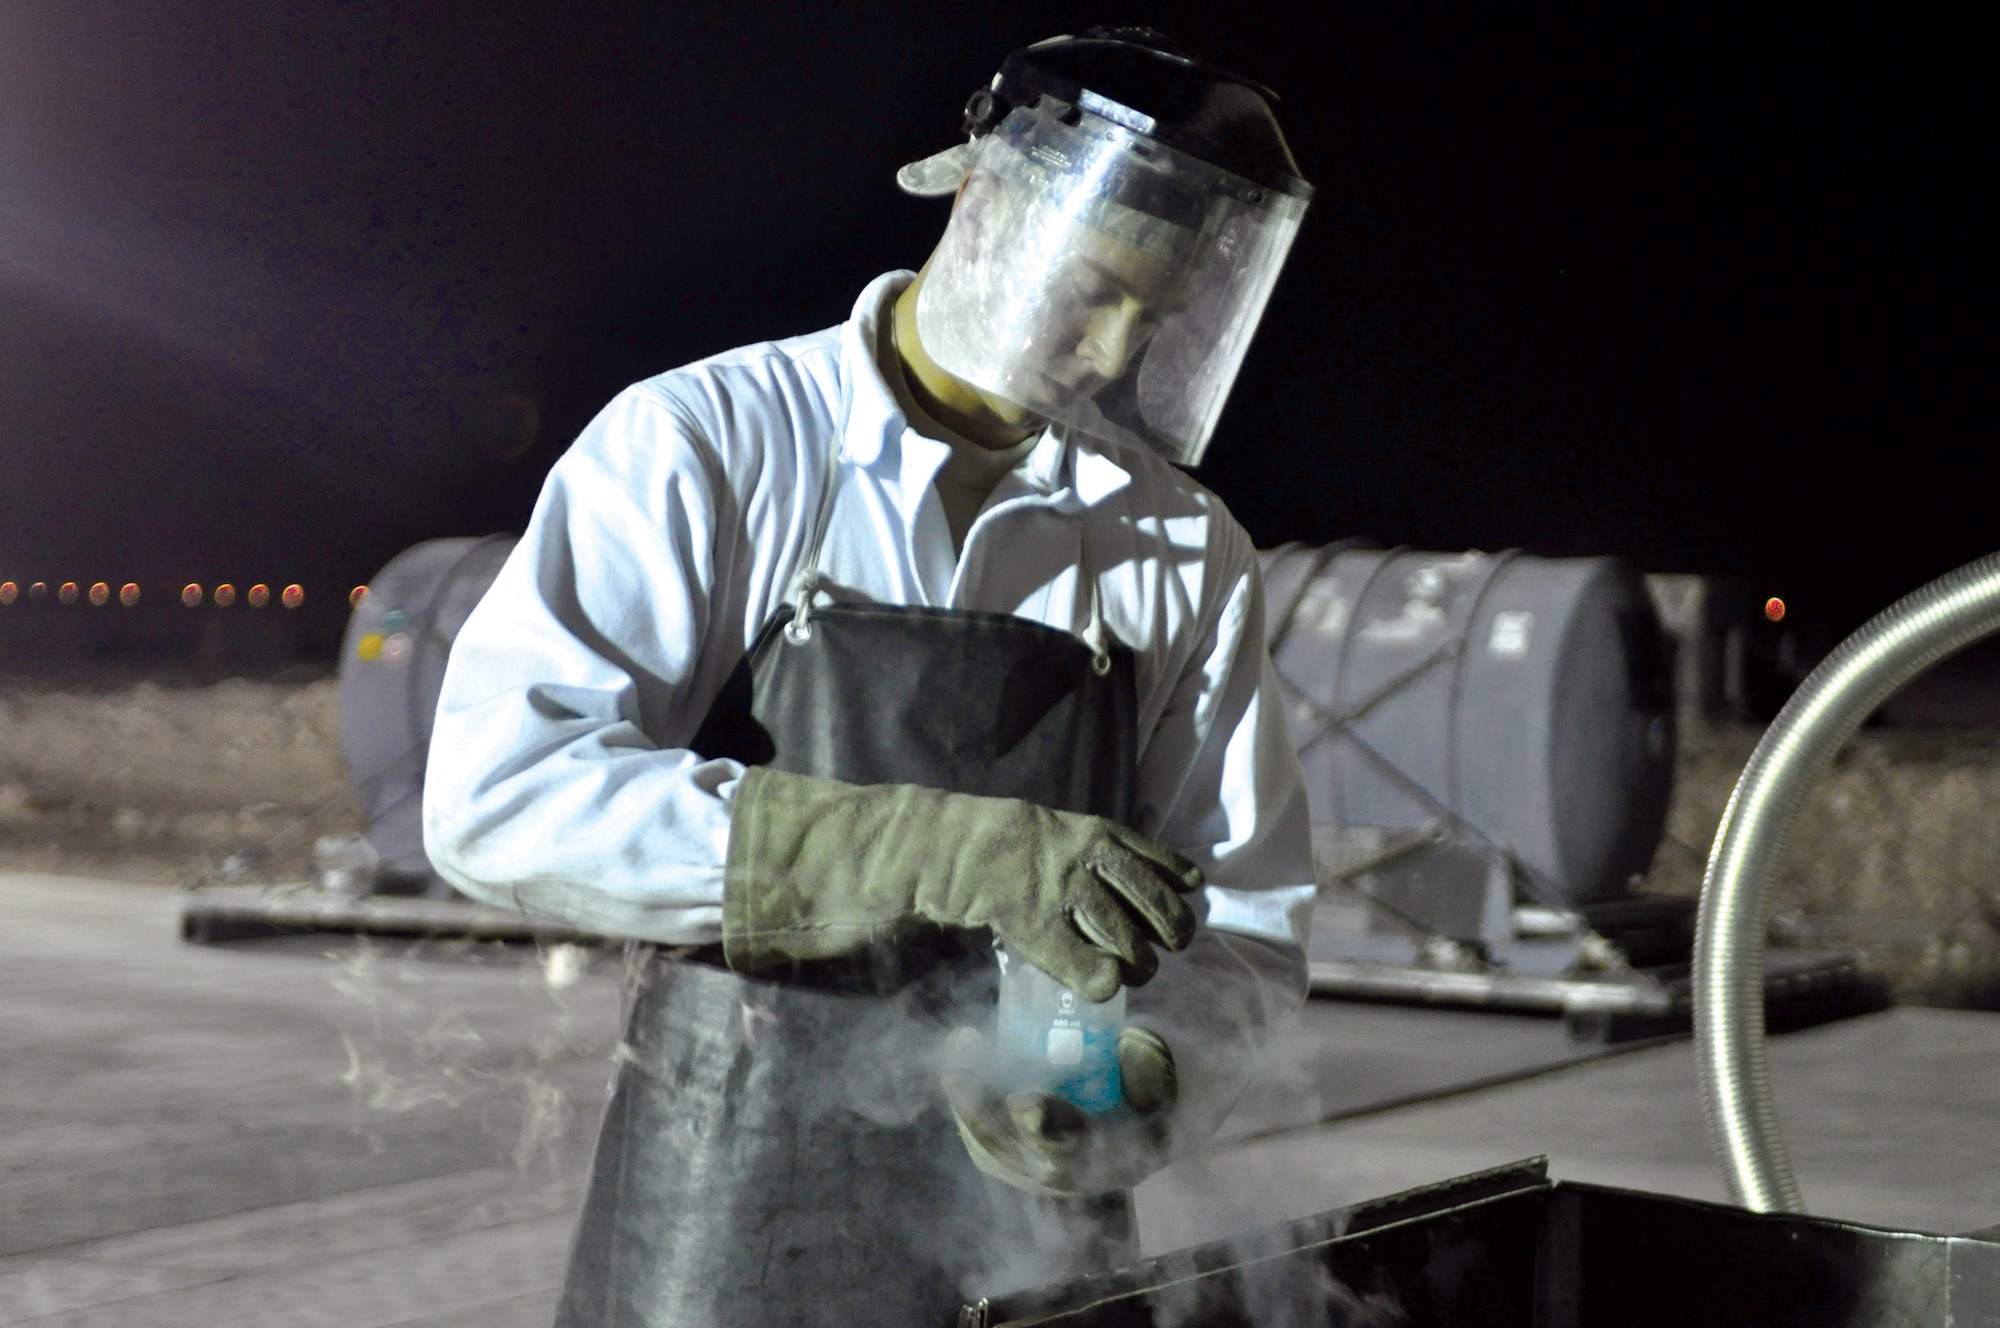 Staff Sgt. Michael Dietz, 379th Expeditionary Logistics Readiness Squadron cryogenics technician, pulls a sample of liquid oxygen from a cart. When the liquid oxygen boils off, Sergeant Dietz does an odor test to ensure the sample is pure. (U.S. Air Force photo/Staff Sgt. Nika Glover)